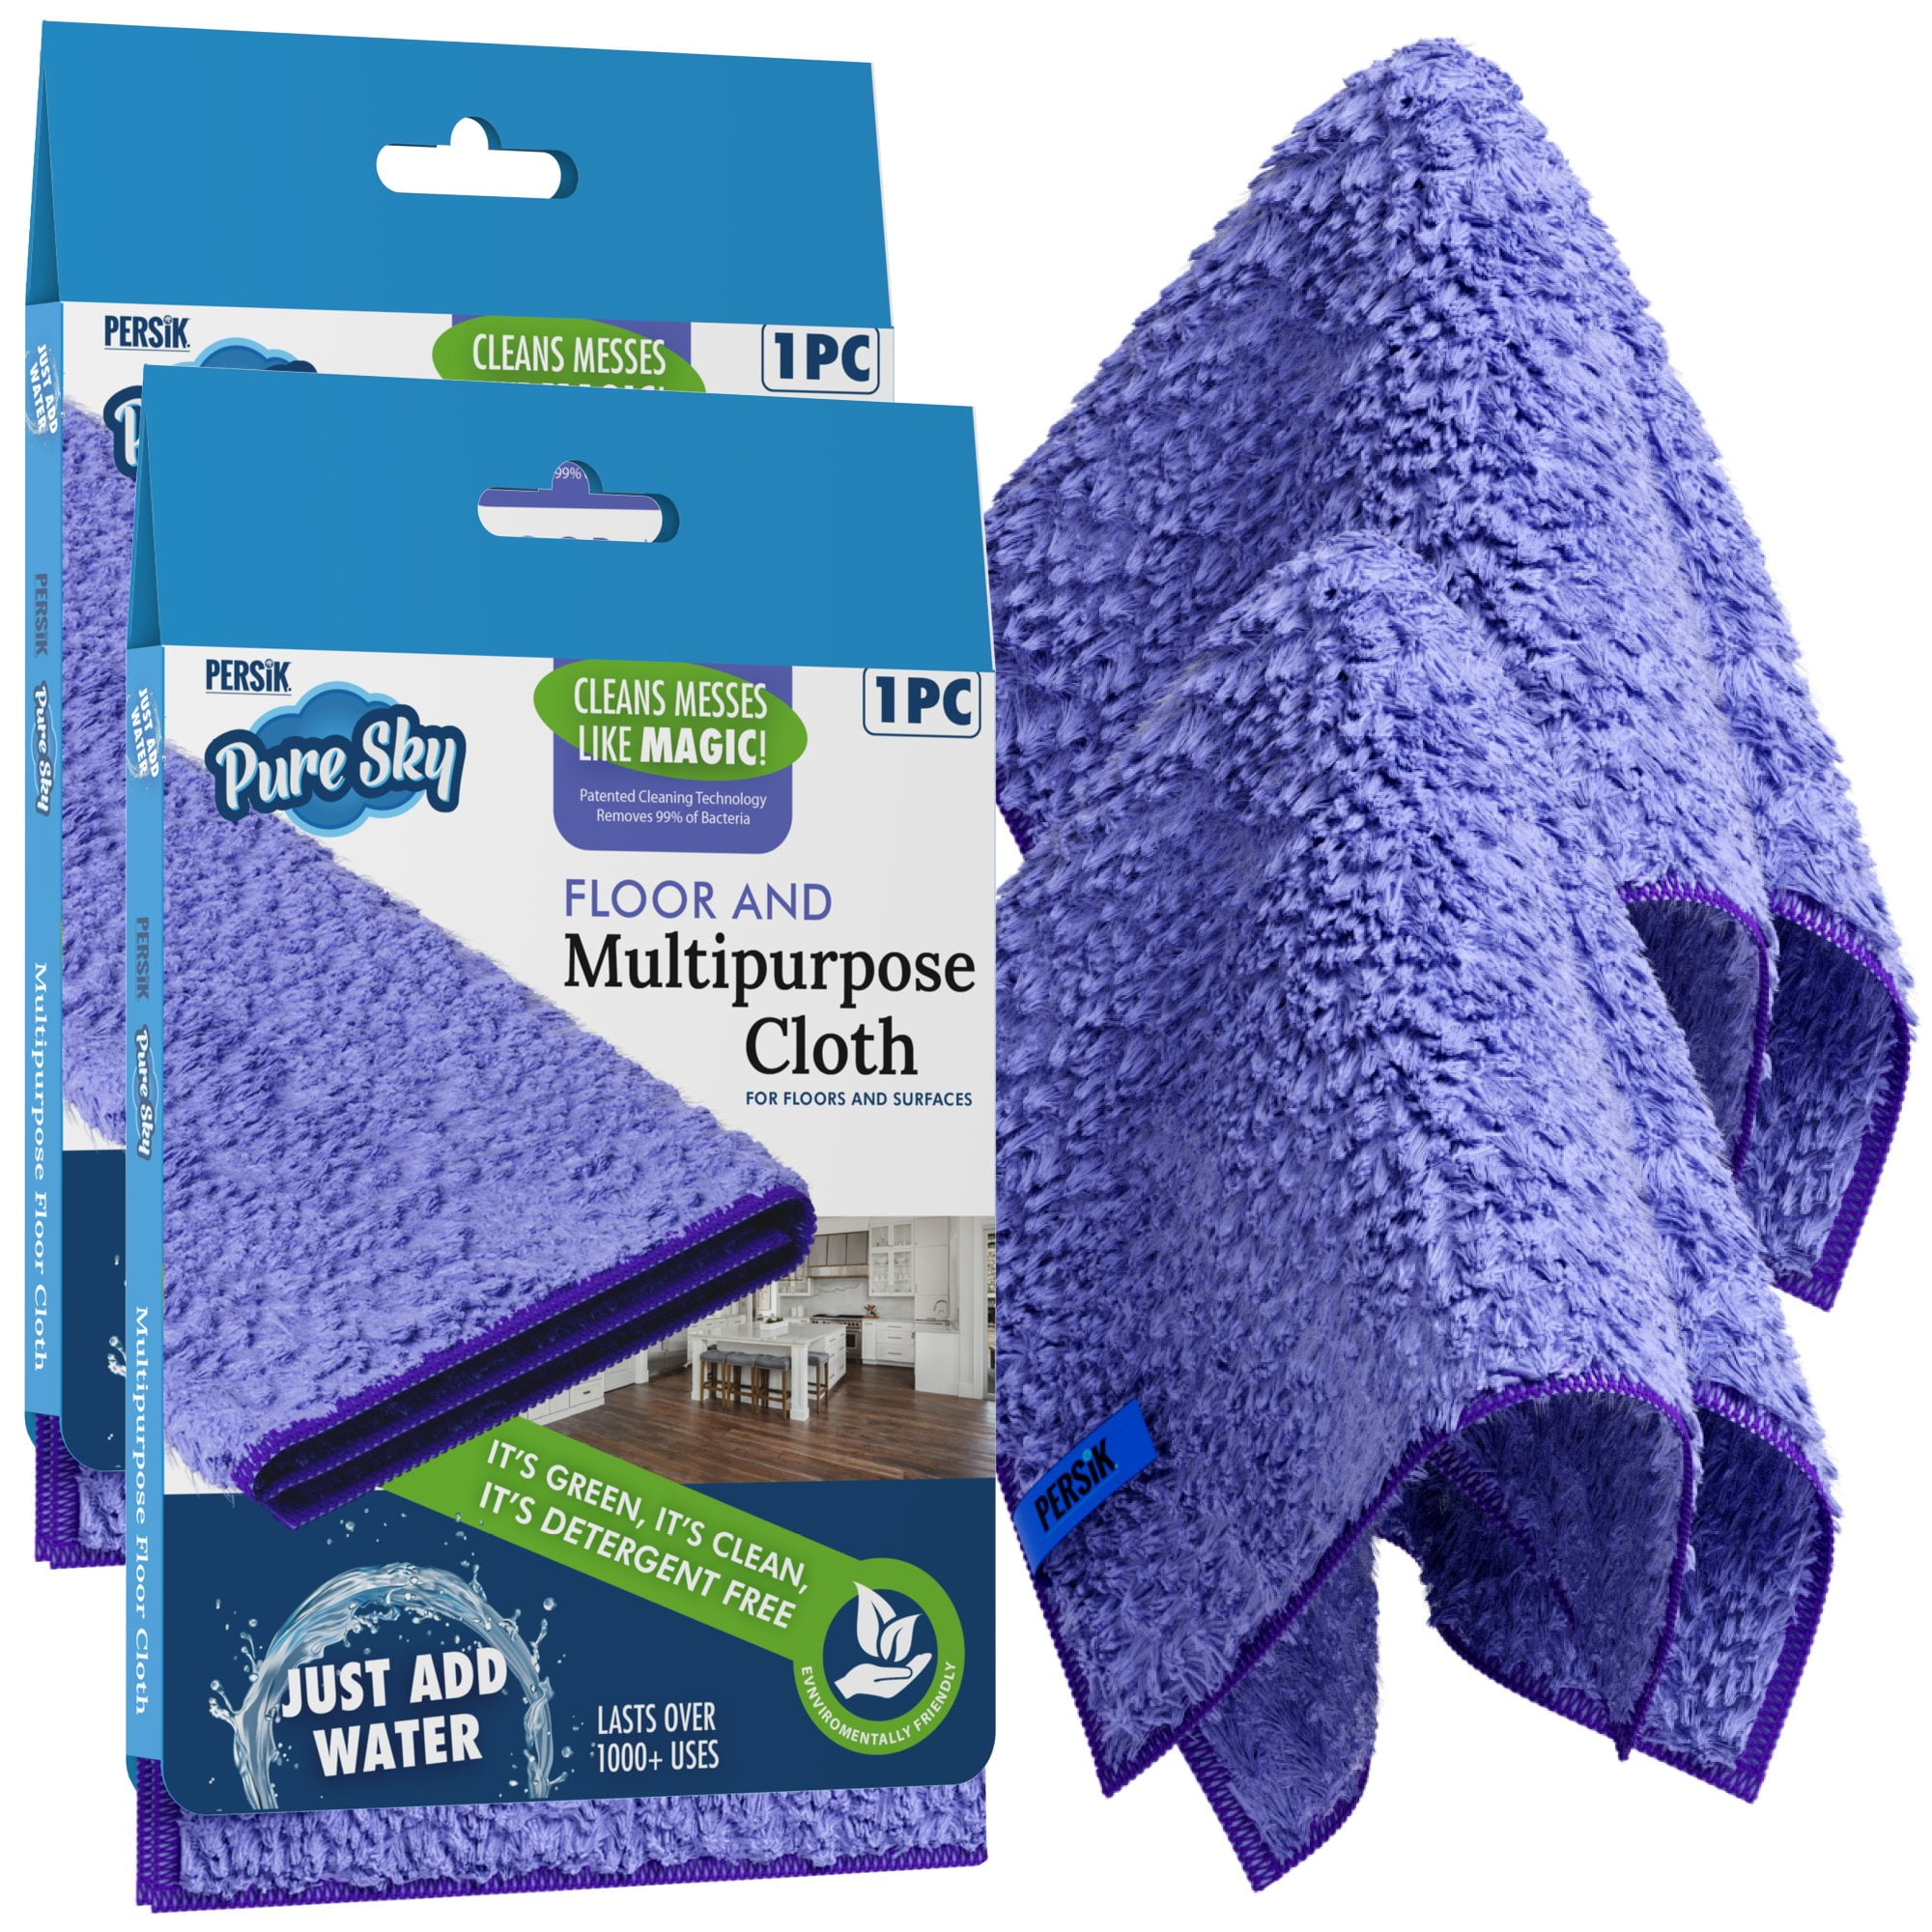 Pure-sky Magic Microfiber Dusting Mitt Ultra Microfiber Cleaning Cloth Glove Just Add Water No Detergents Needed Use for Cleaning Furniture